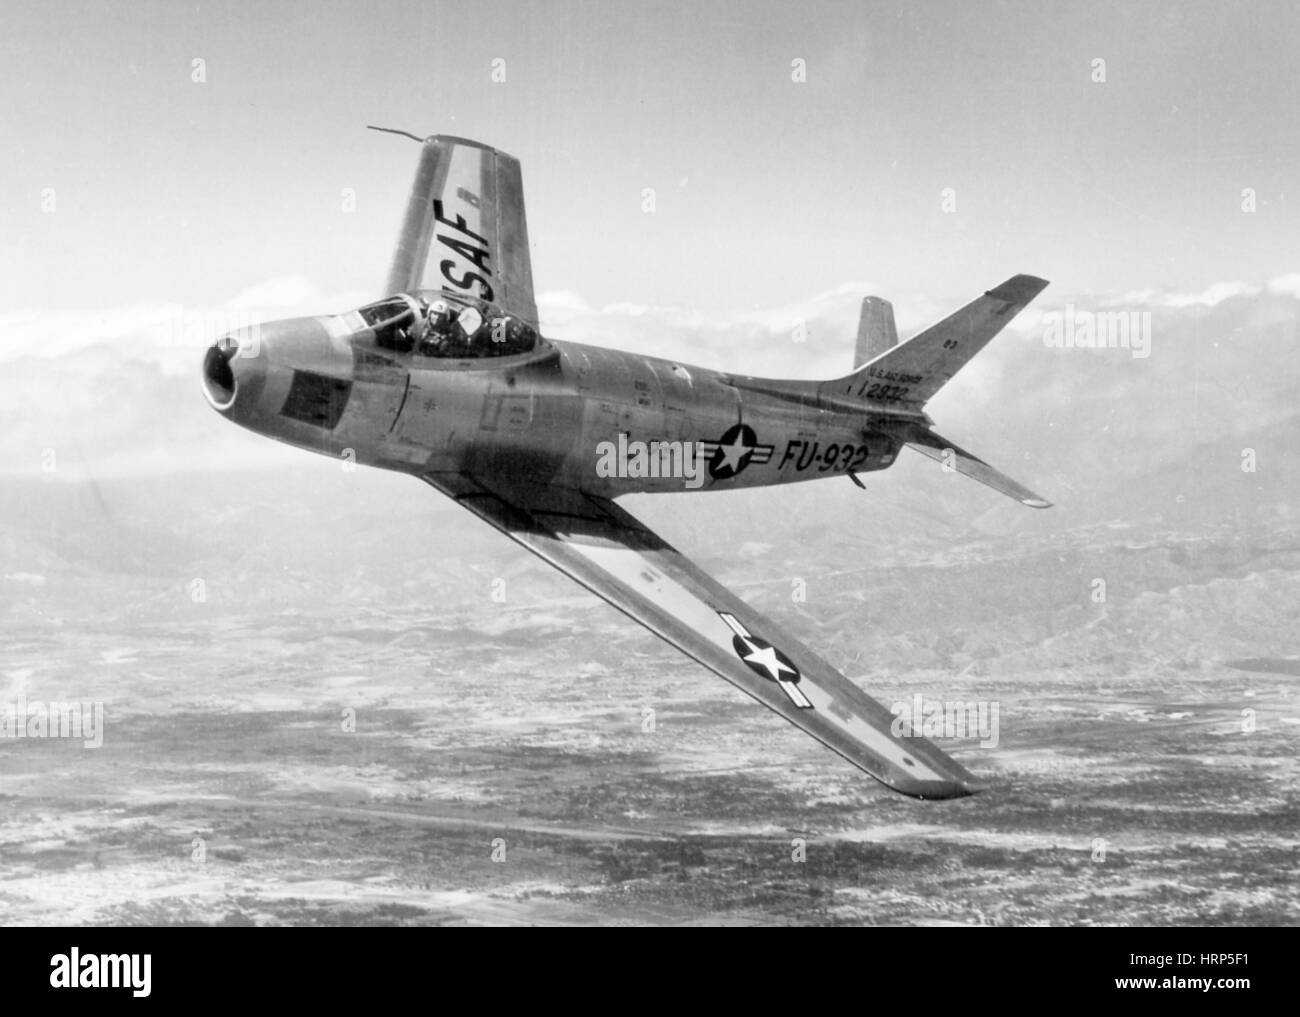 F-86 Sabre, First Swept-Wing Fighter, 1950s Stock Photo